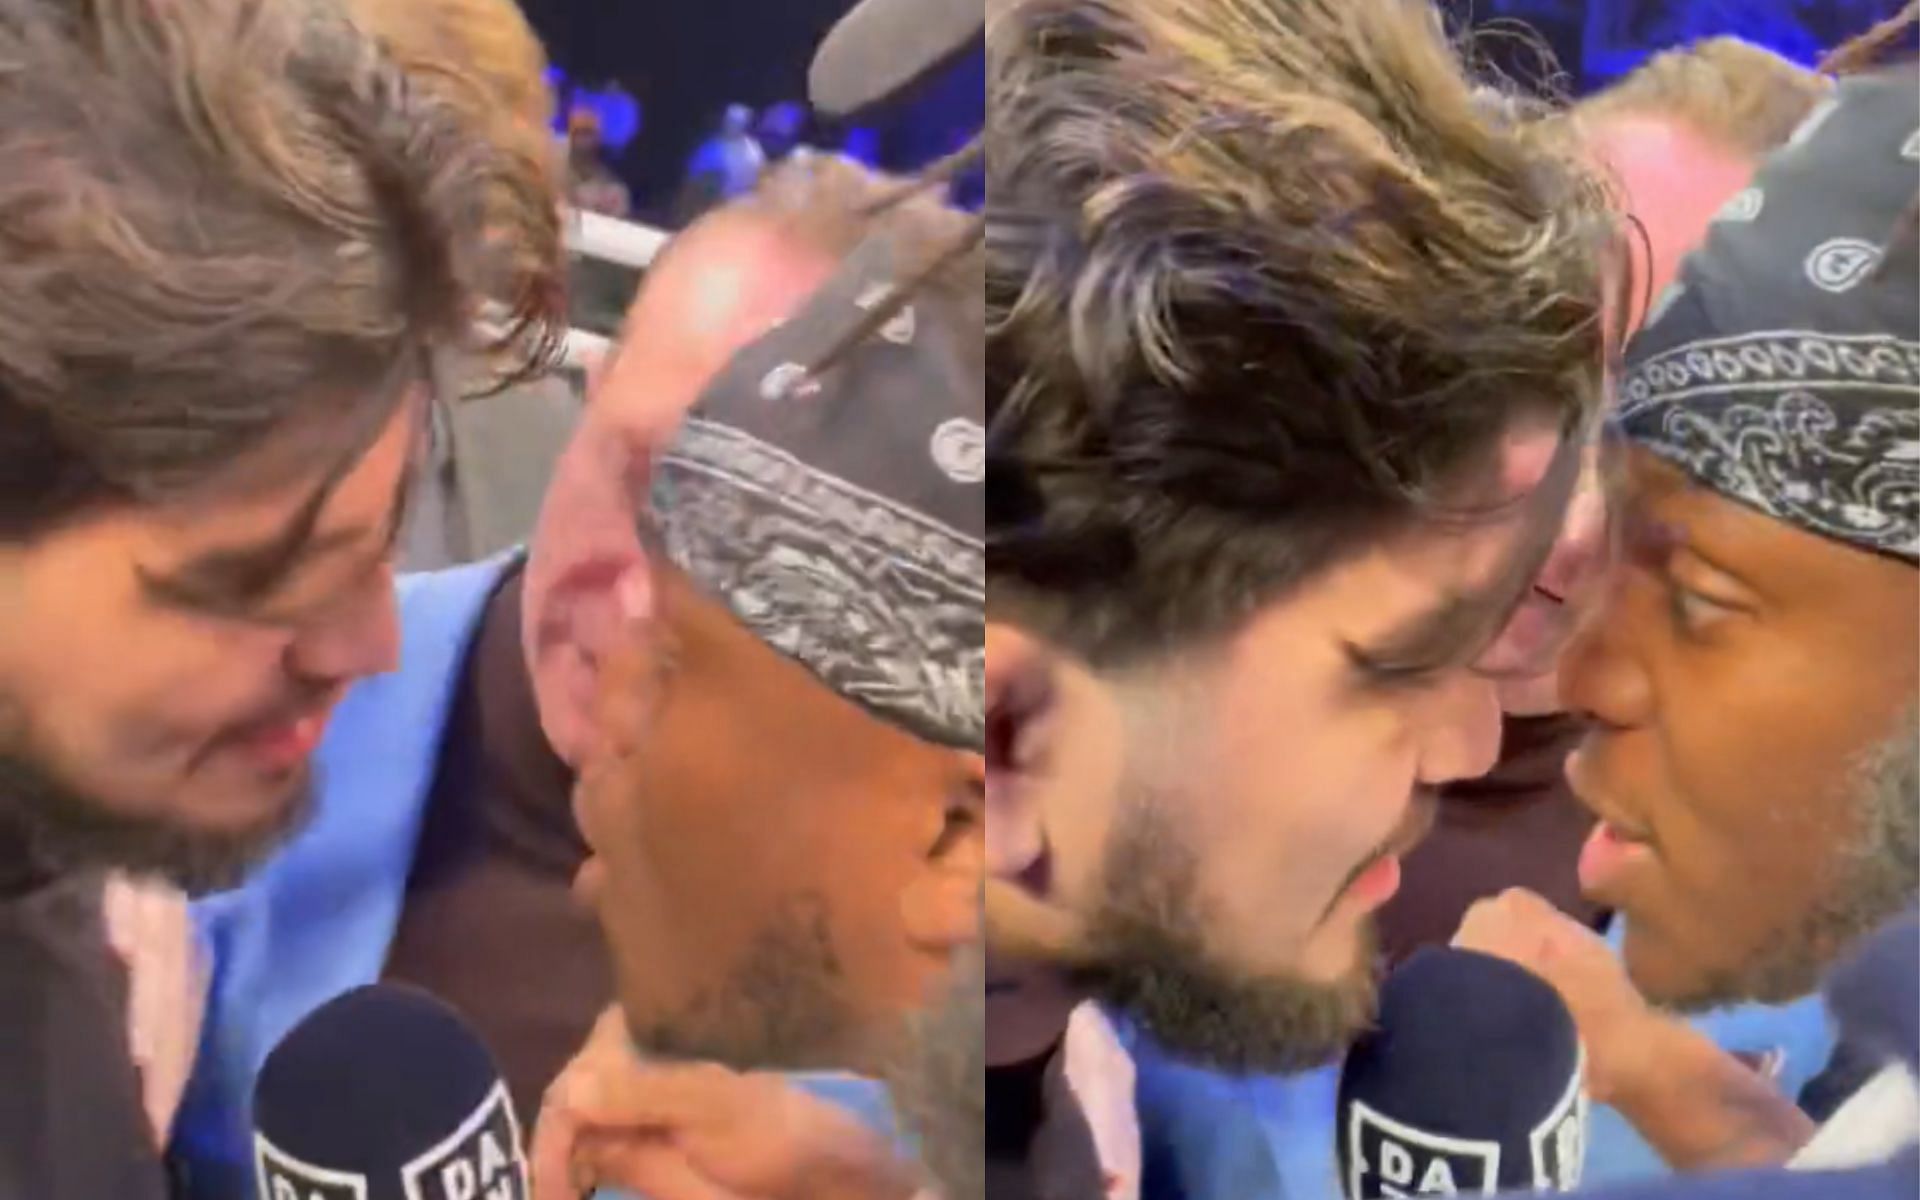 Screenshots of video of Dillon Danis-KSI interaction at Misfits Boxing 3 [images courtesy: @misfitsboxing on Twitter]